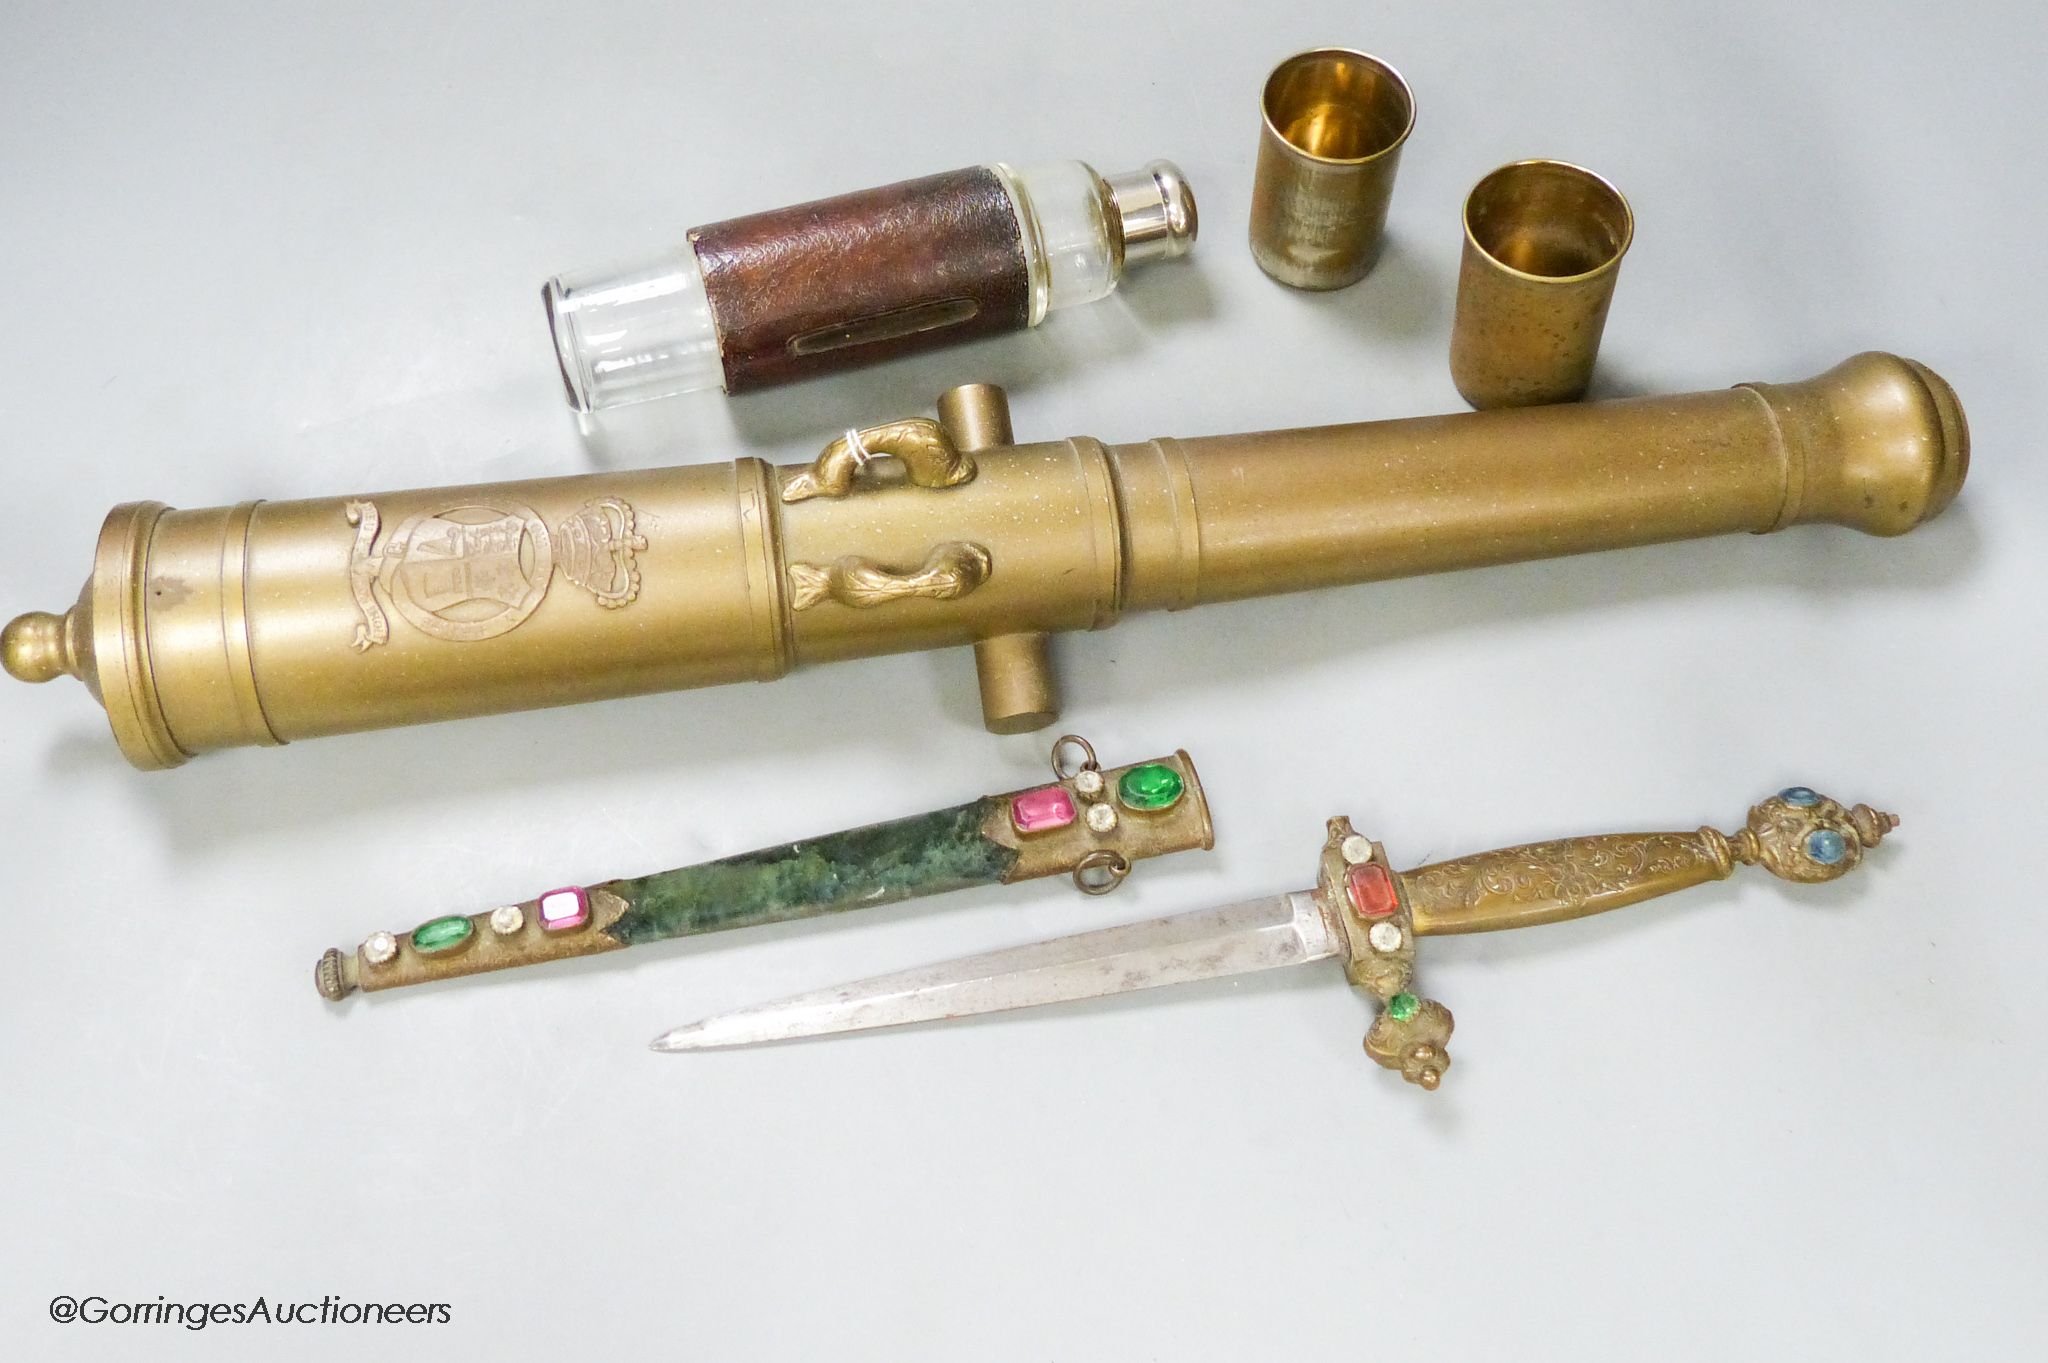 A bronze model cannon barrel, a dagger and a leather cased 'toddy' bottle